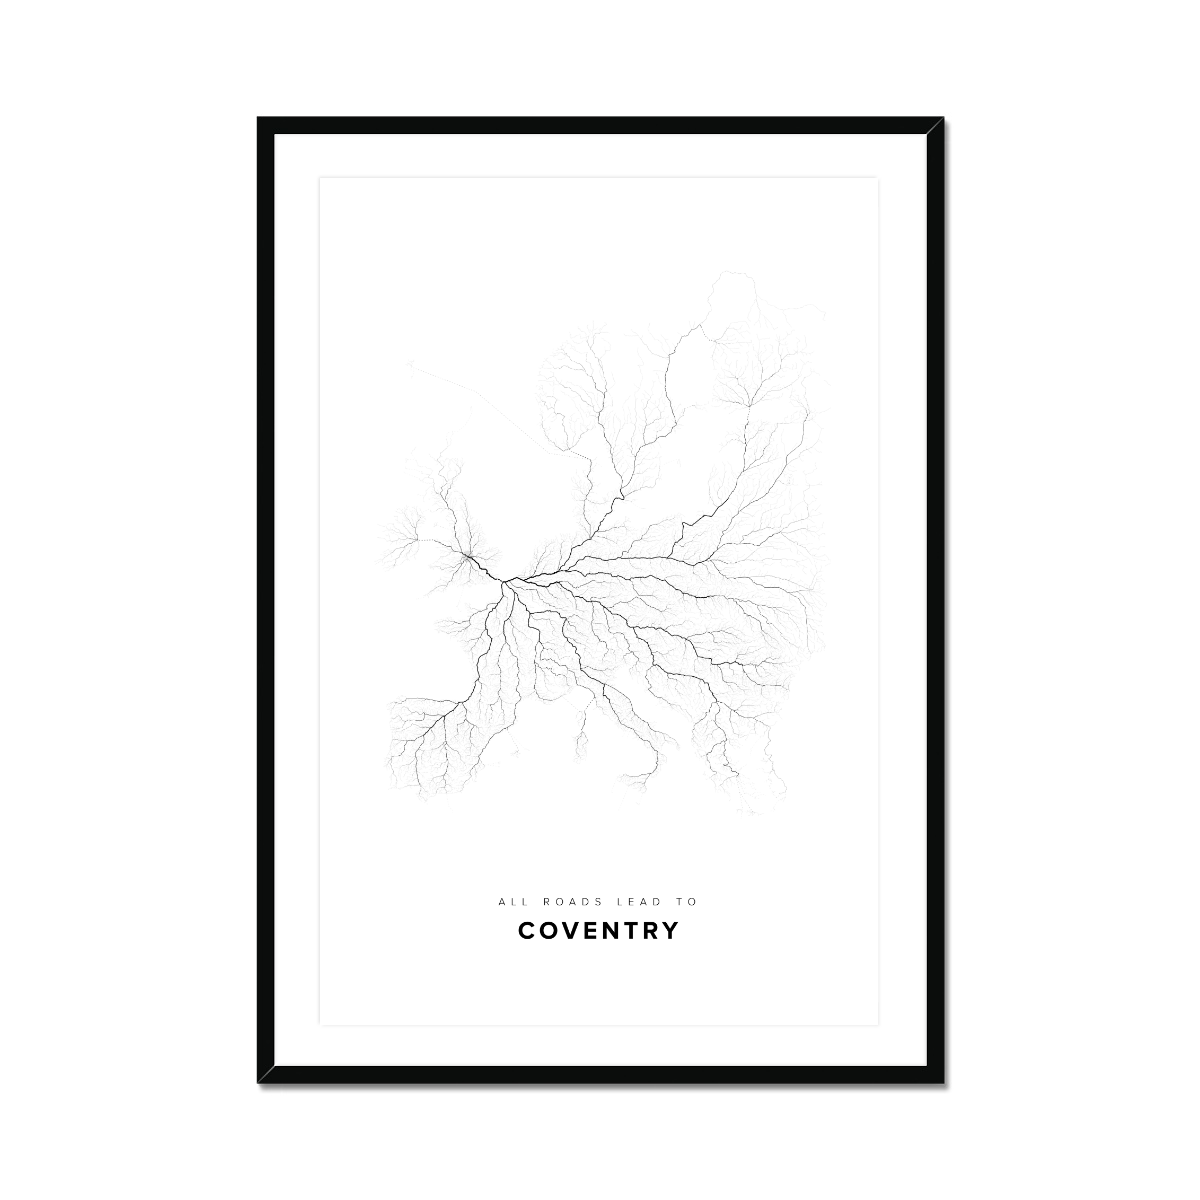 All roads lead to Coventry (United Kingdom of Great Britain and Northern Ireland) Fine Art Map Print